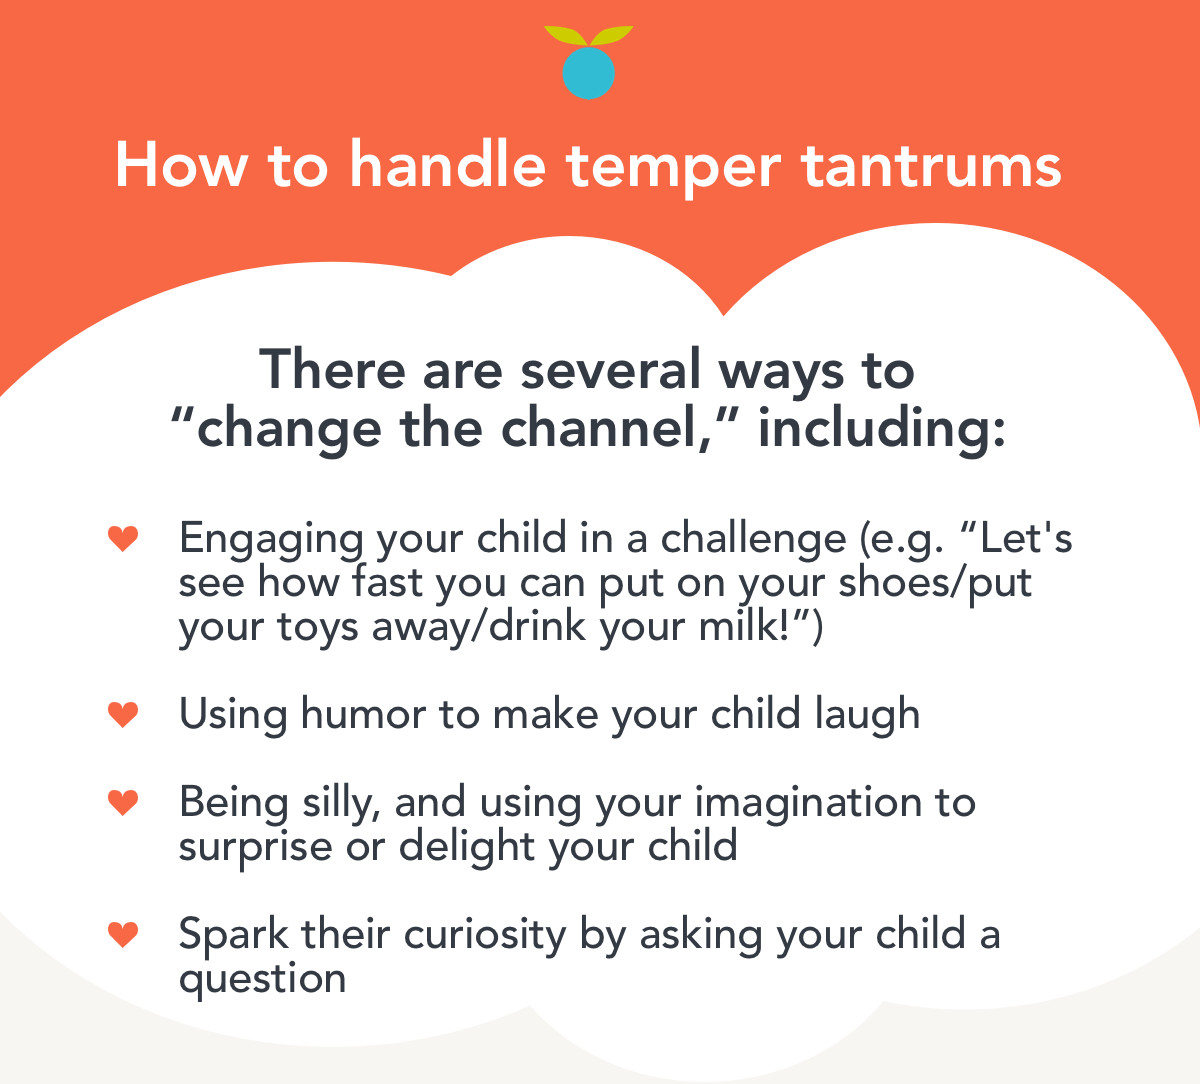 How to deal with a kid temper tantrum: A list of tips to "change the channel"